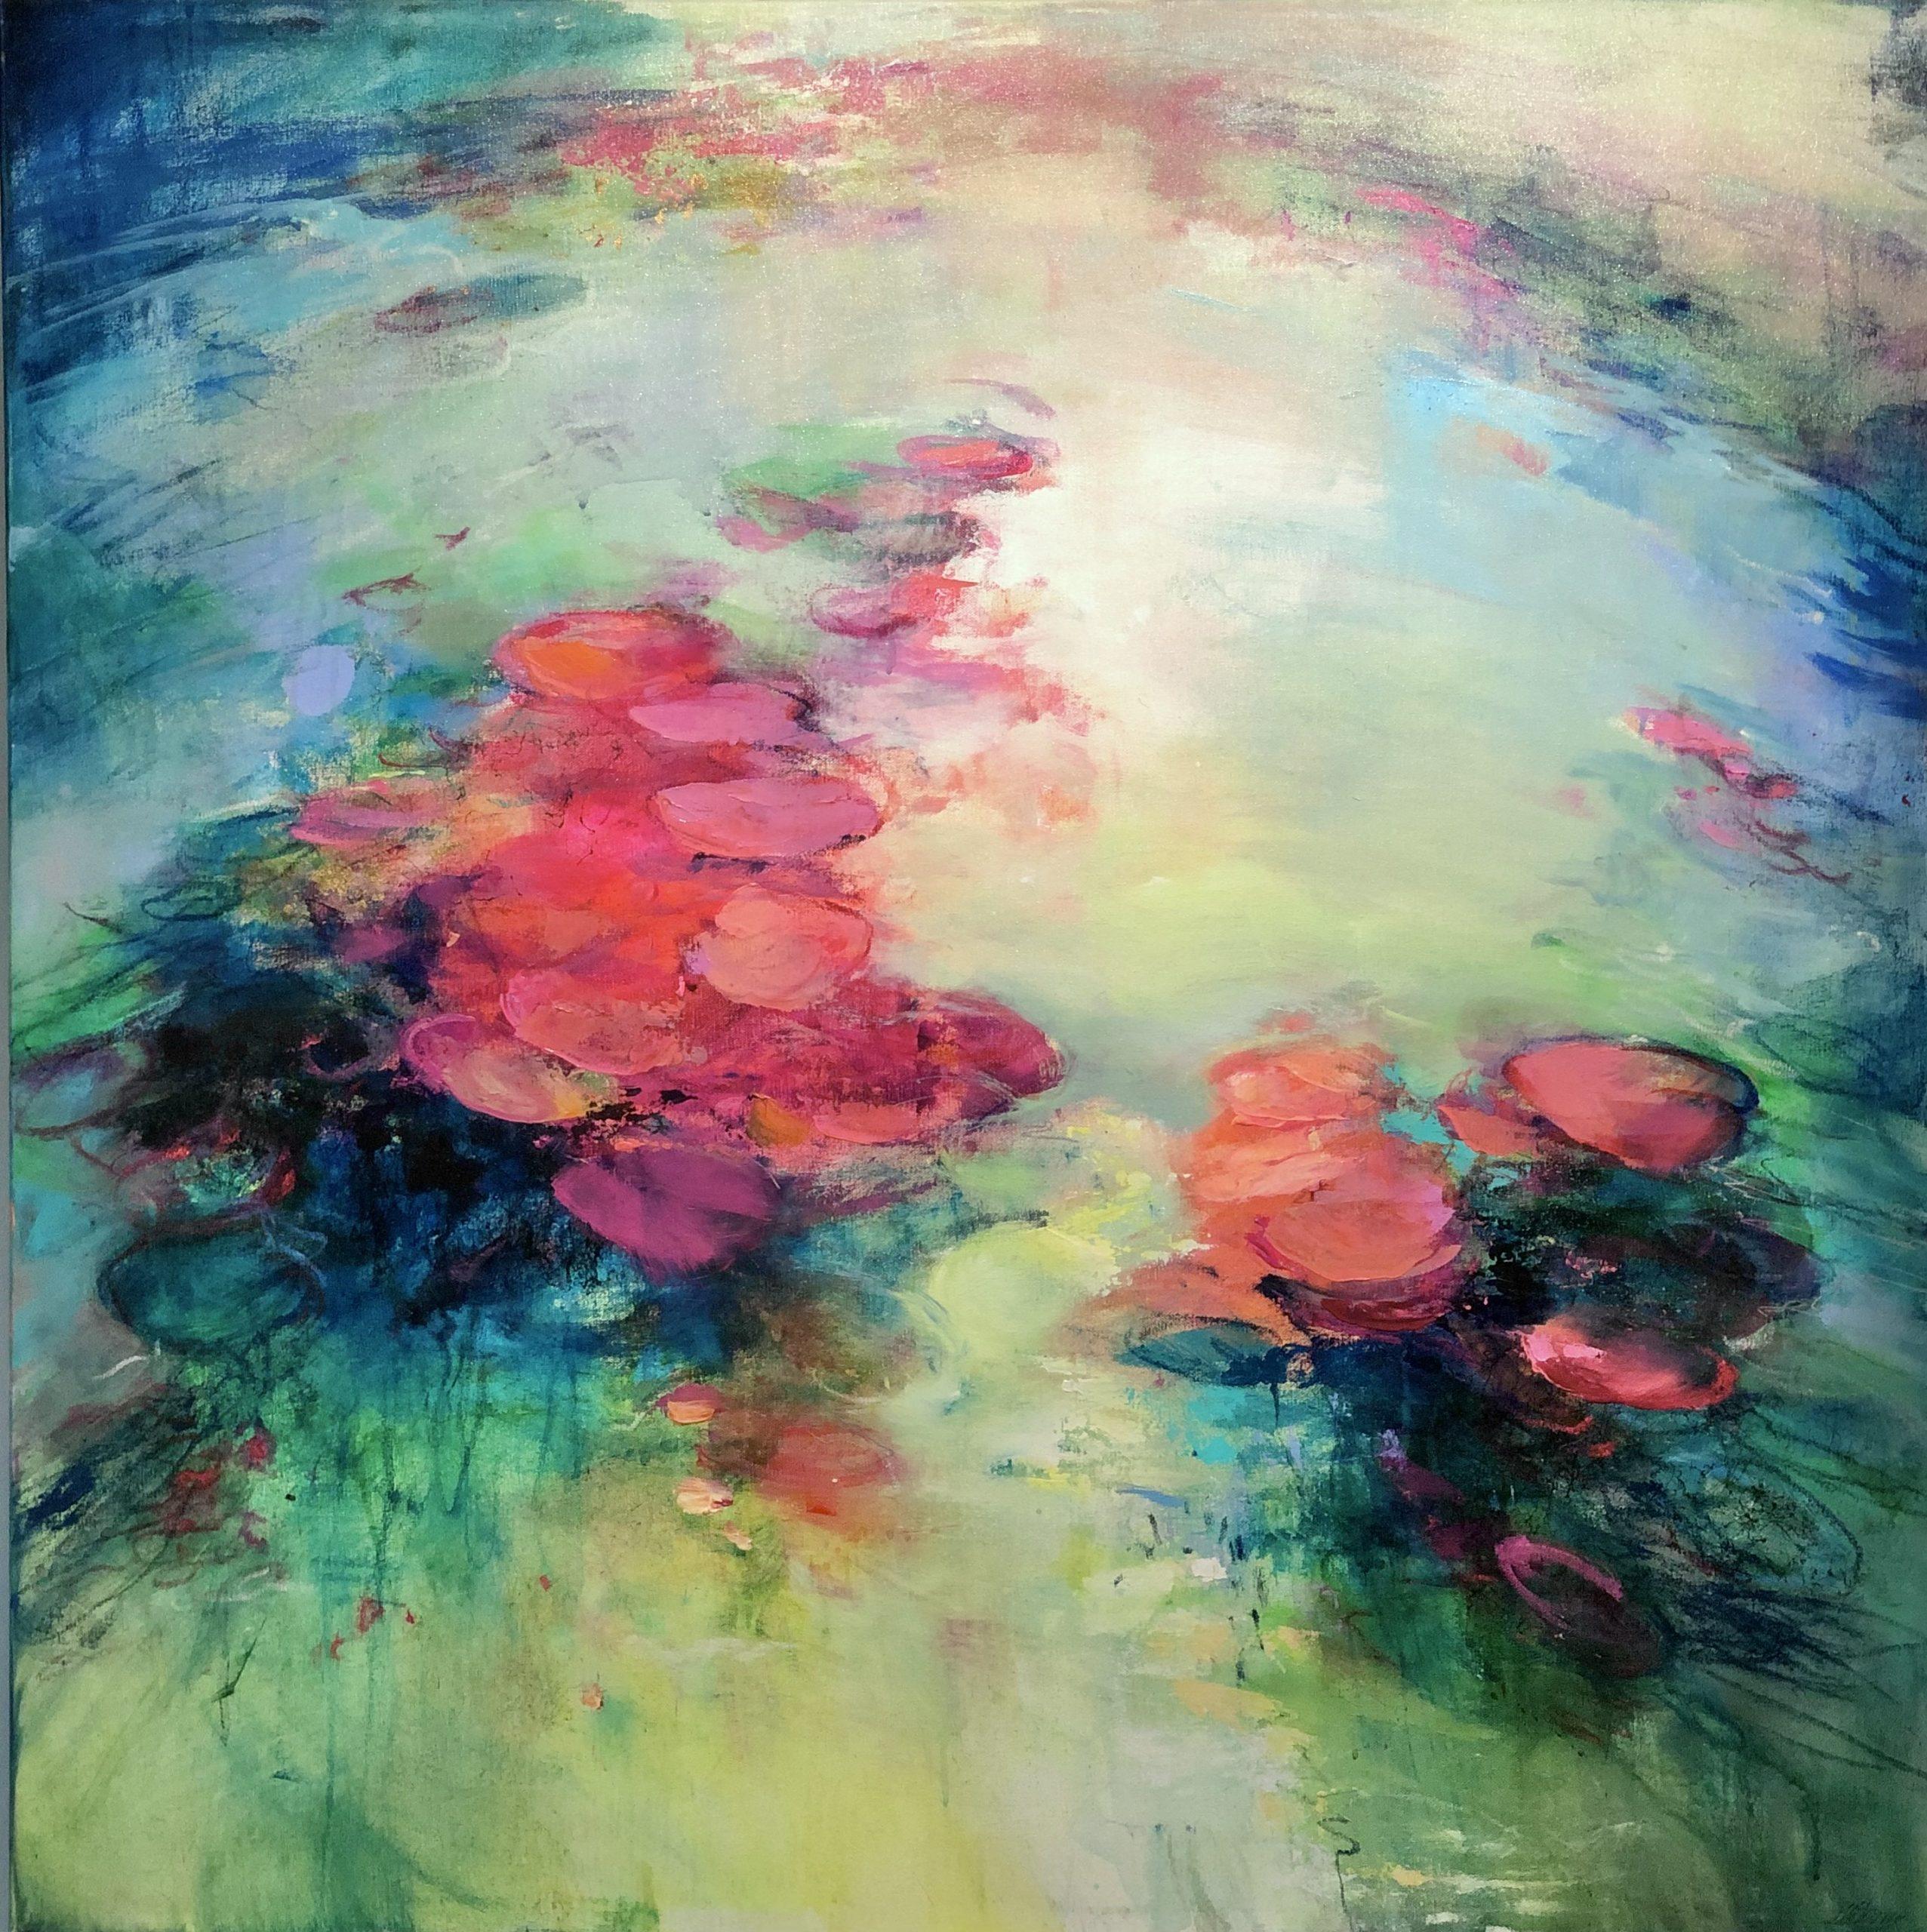 Out of my depths- original abstract floral waterscape painting - Modern Art - Abstract Expressionist Painting by Magdalena Morey